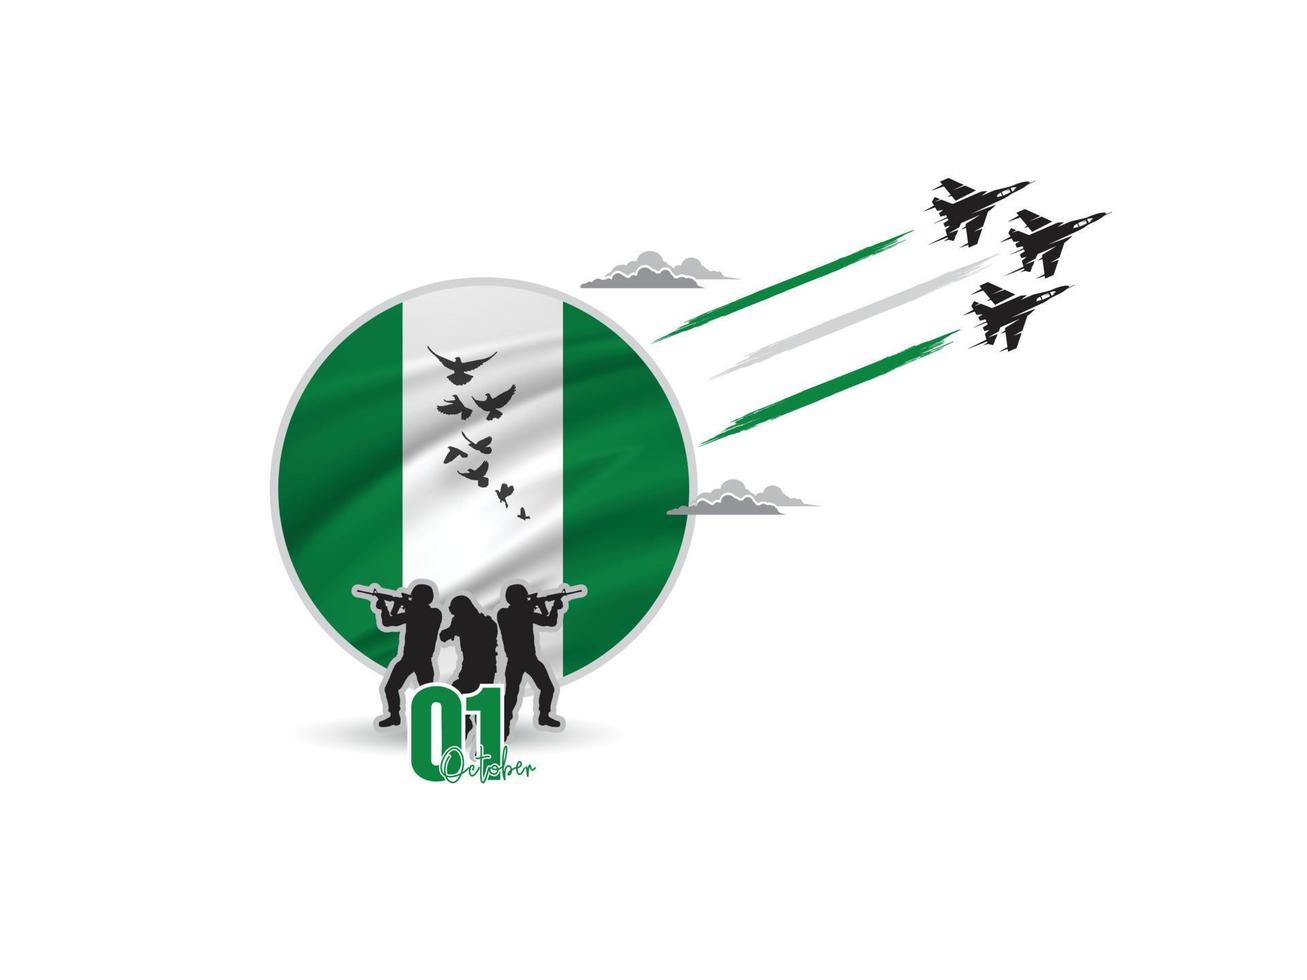 Celebrating Independence day of Nigeria, October 01, Saluting soldiers and army are in action, Ari forces showing air show in the sky, A national holiday observed by The Republic of Nigeria on 1960 vector